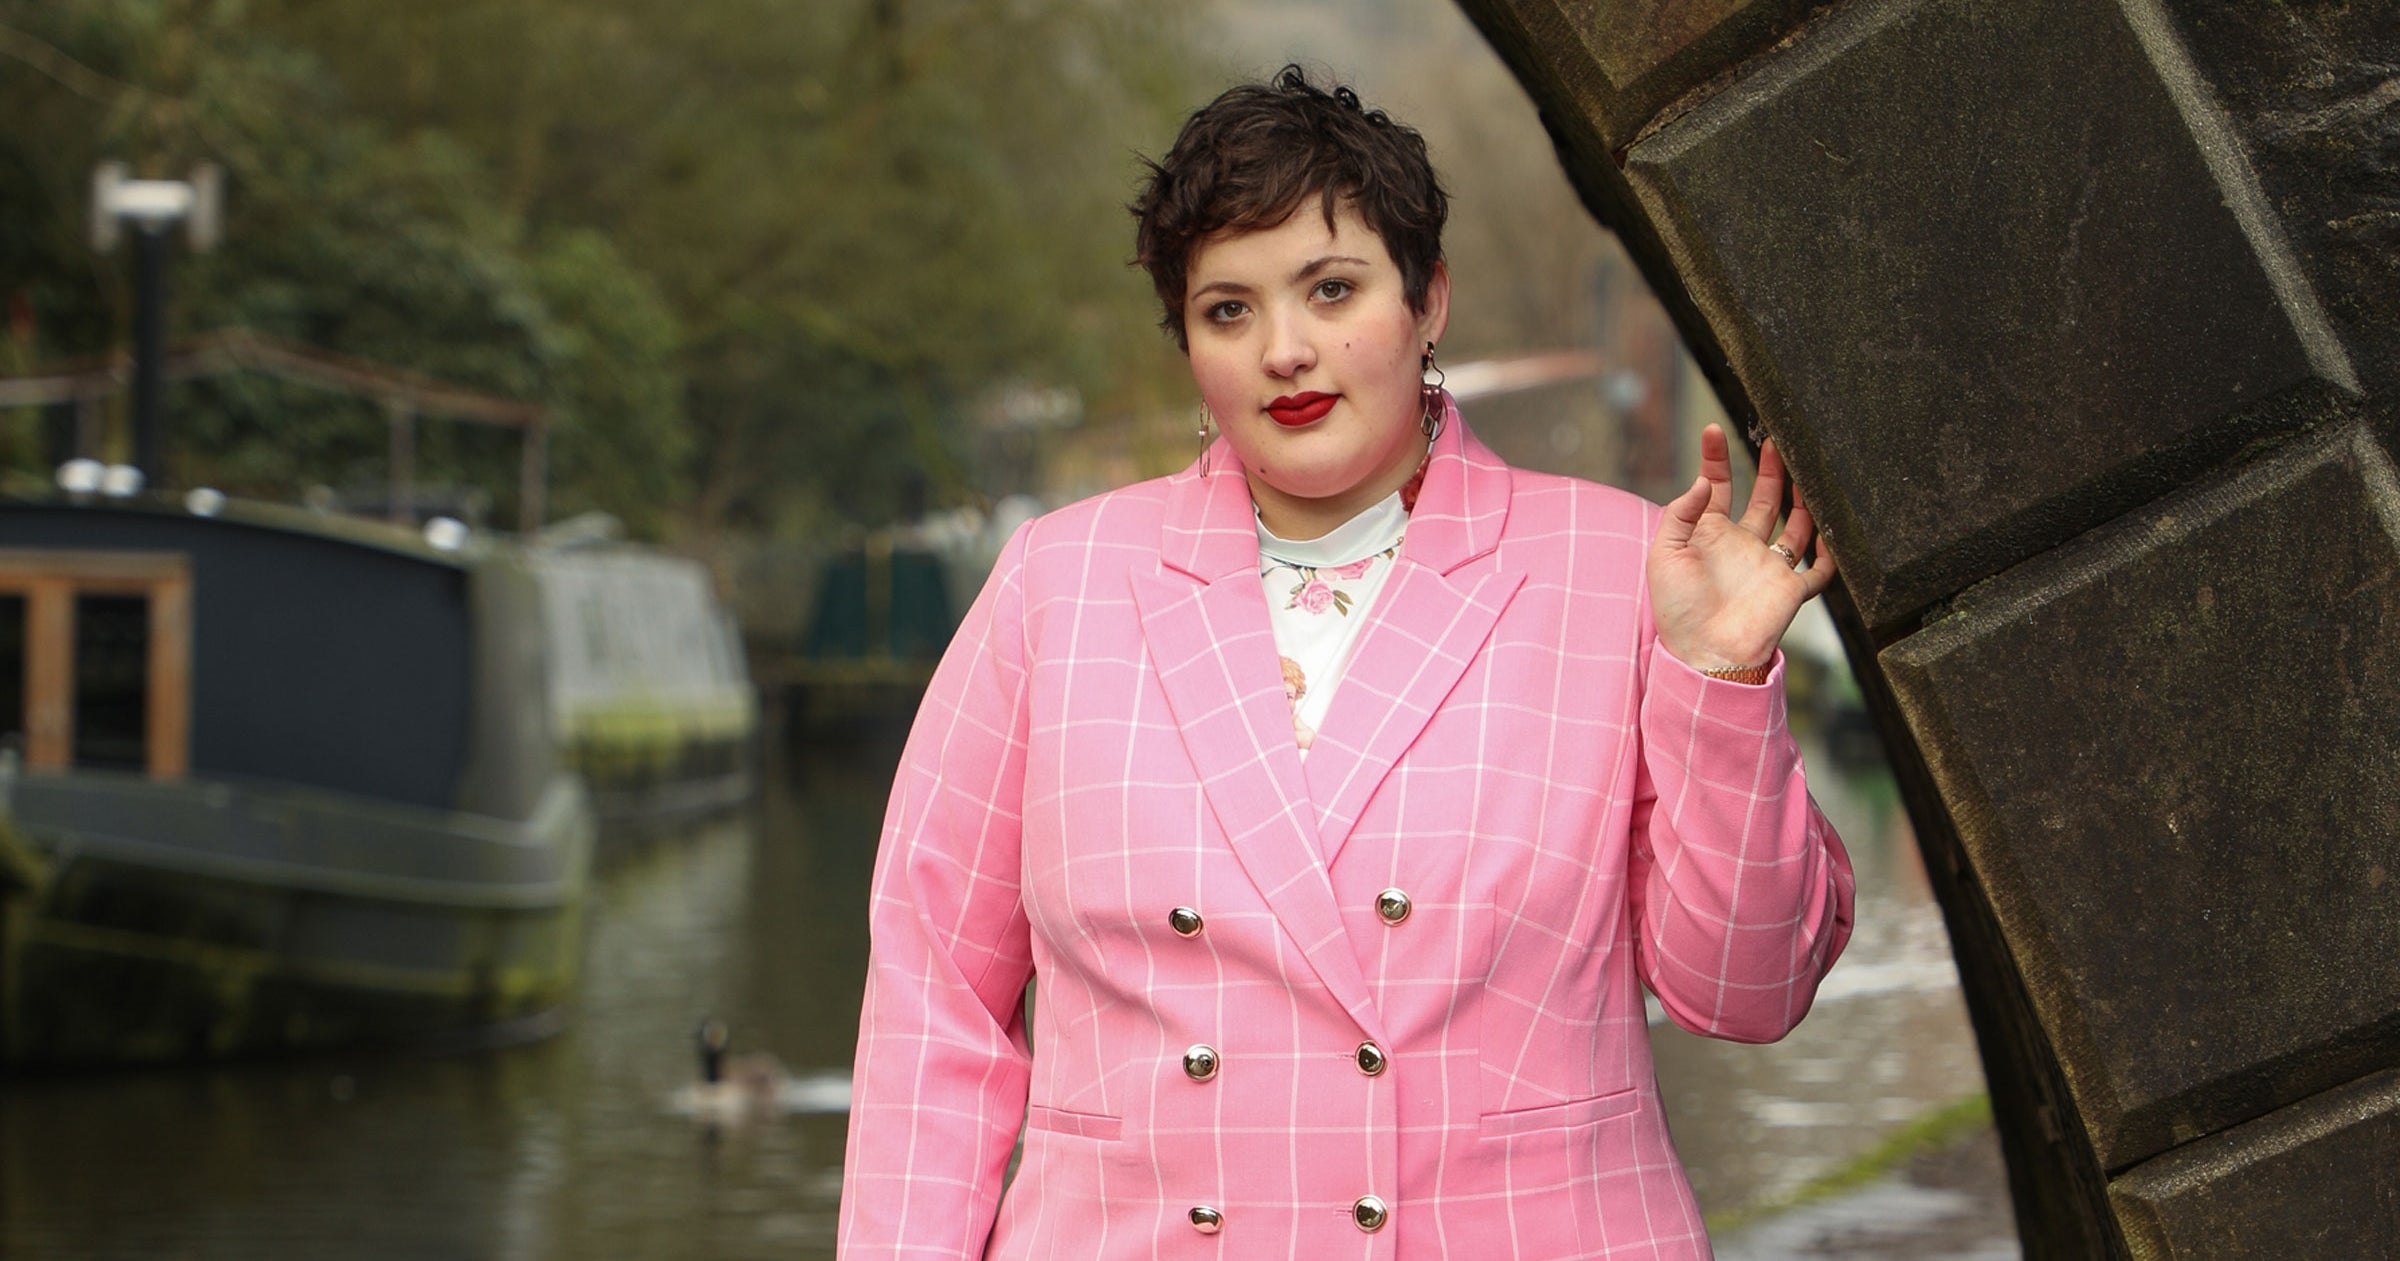 How To Nail Suiting If You're Plus Size